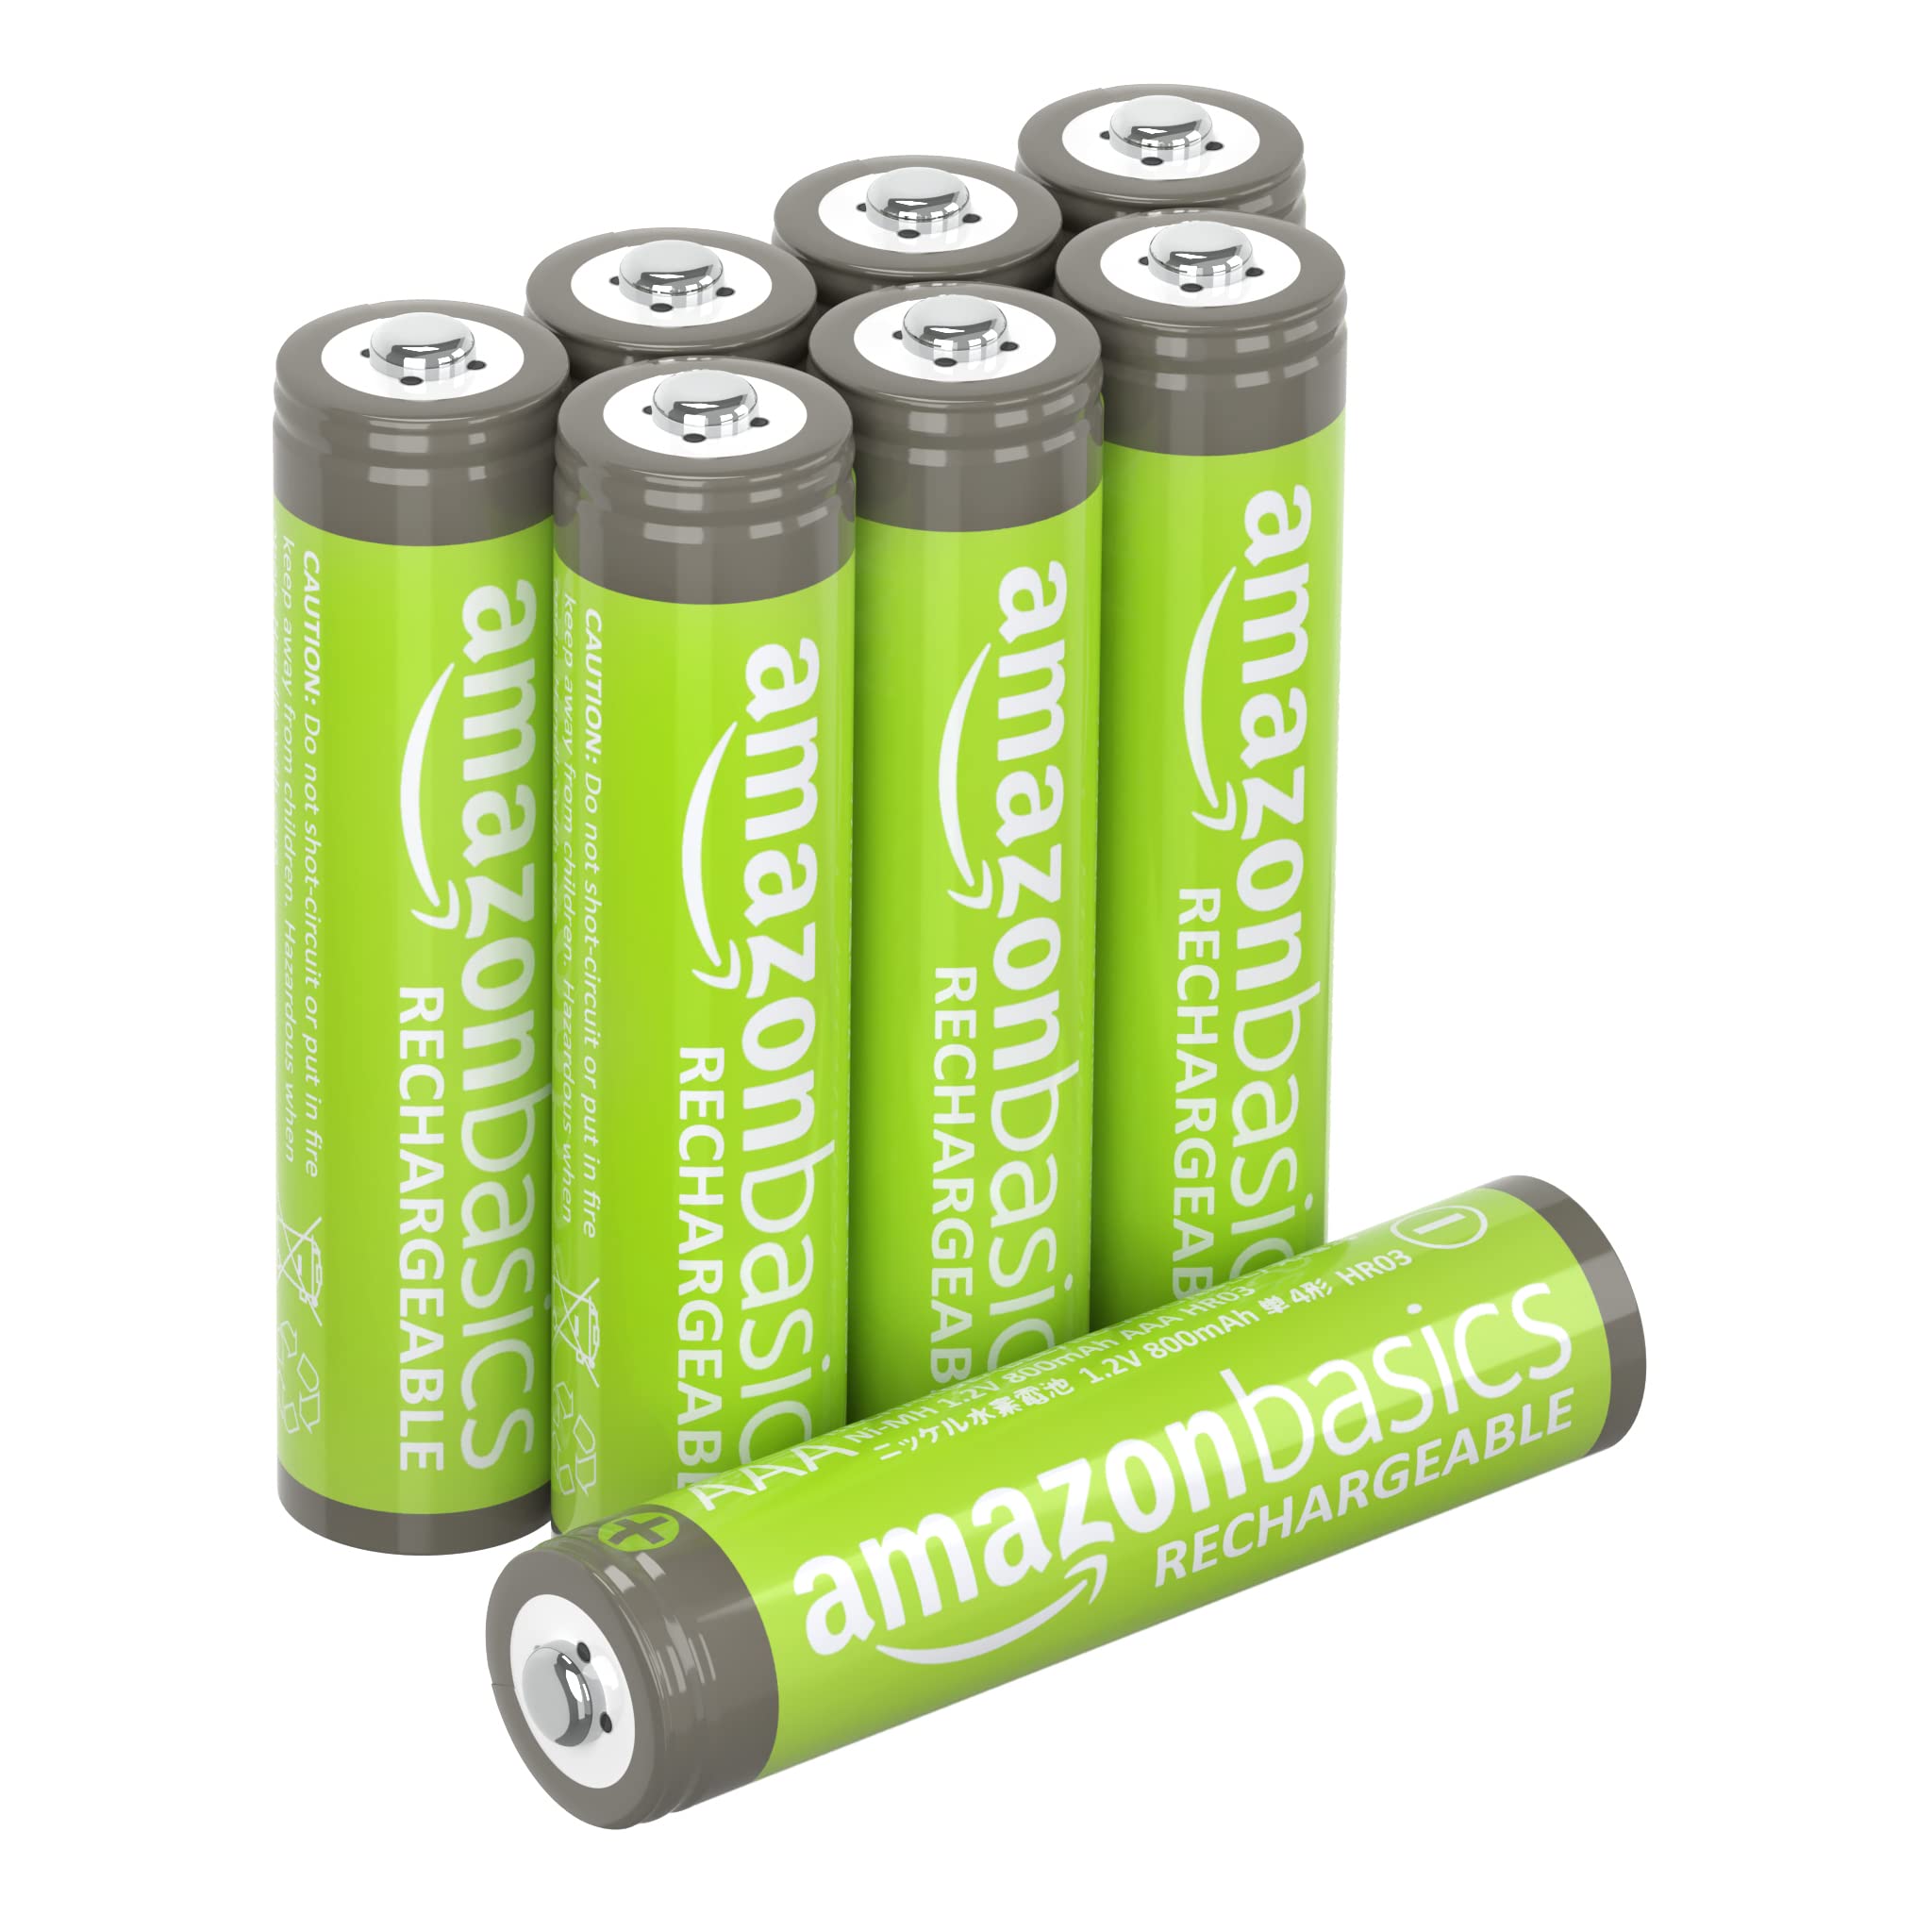 Amazon Basics 8-Pack Rechargeable AAA NiMh Performance Batteries, 800 mAh, Recharge up to 1000x Times, Pre-Charged